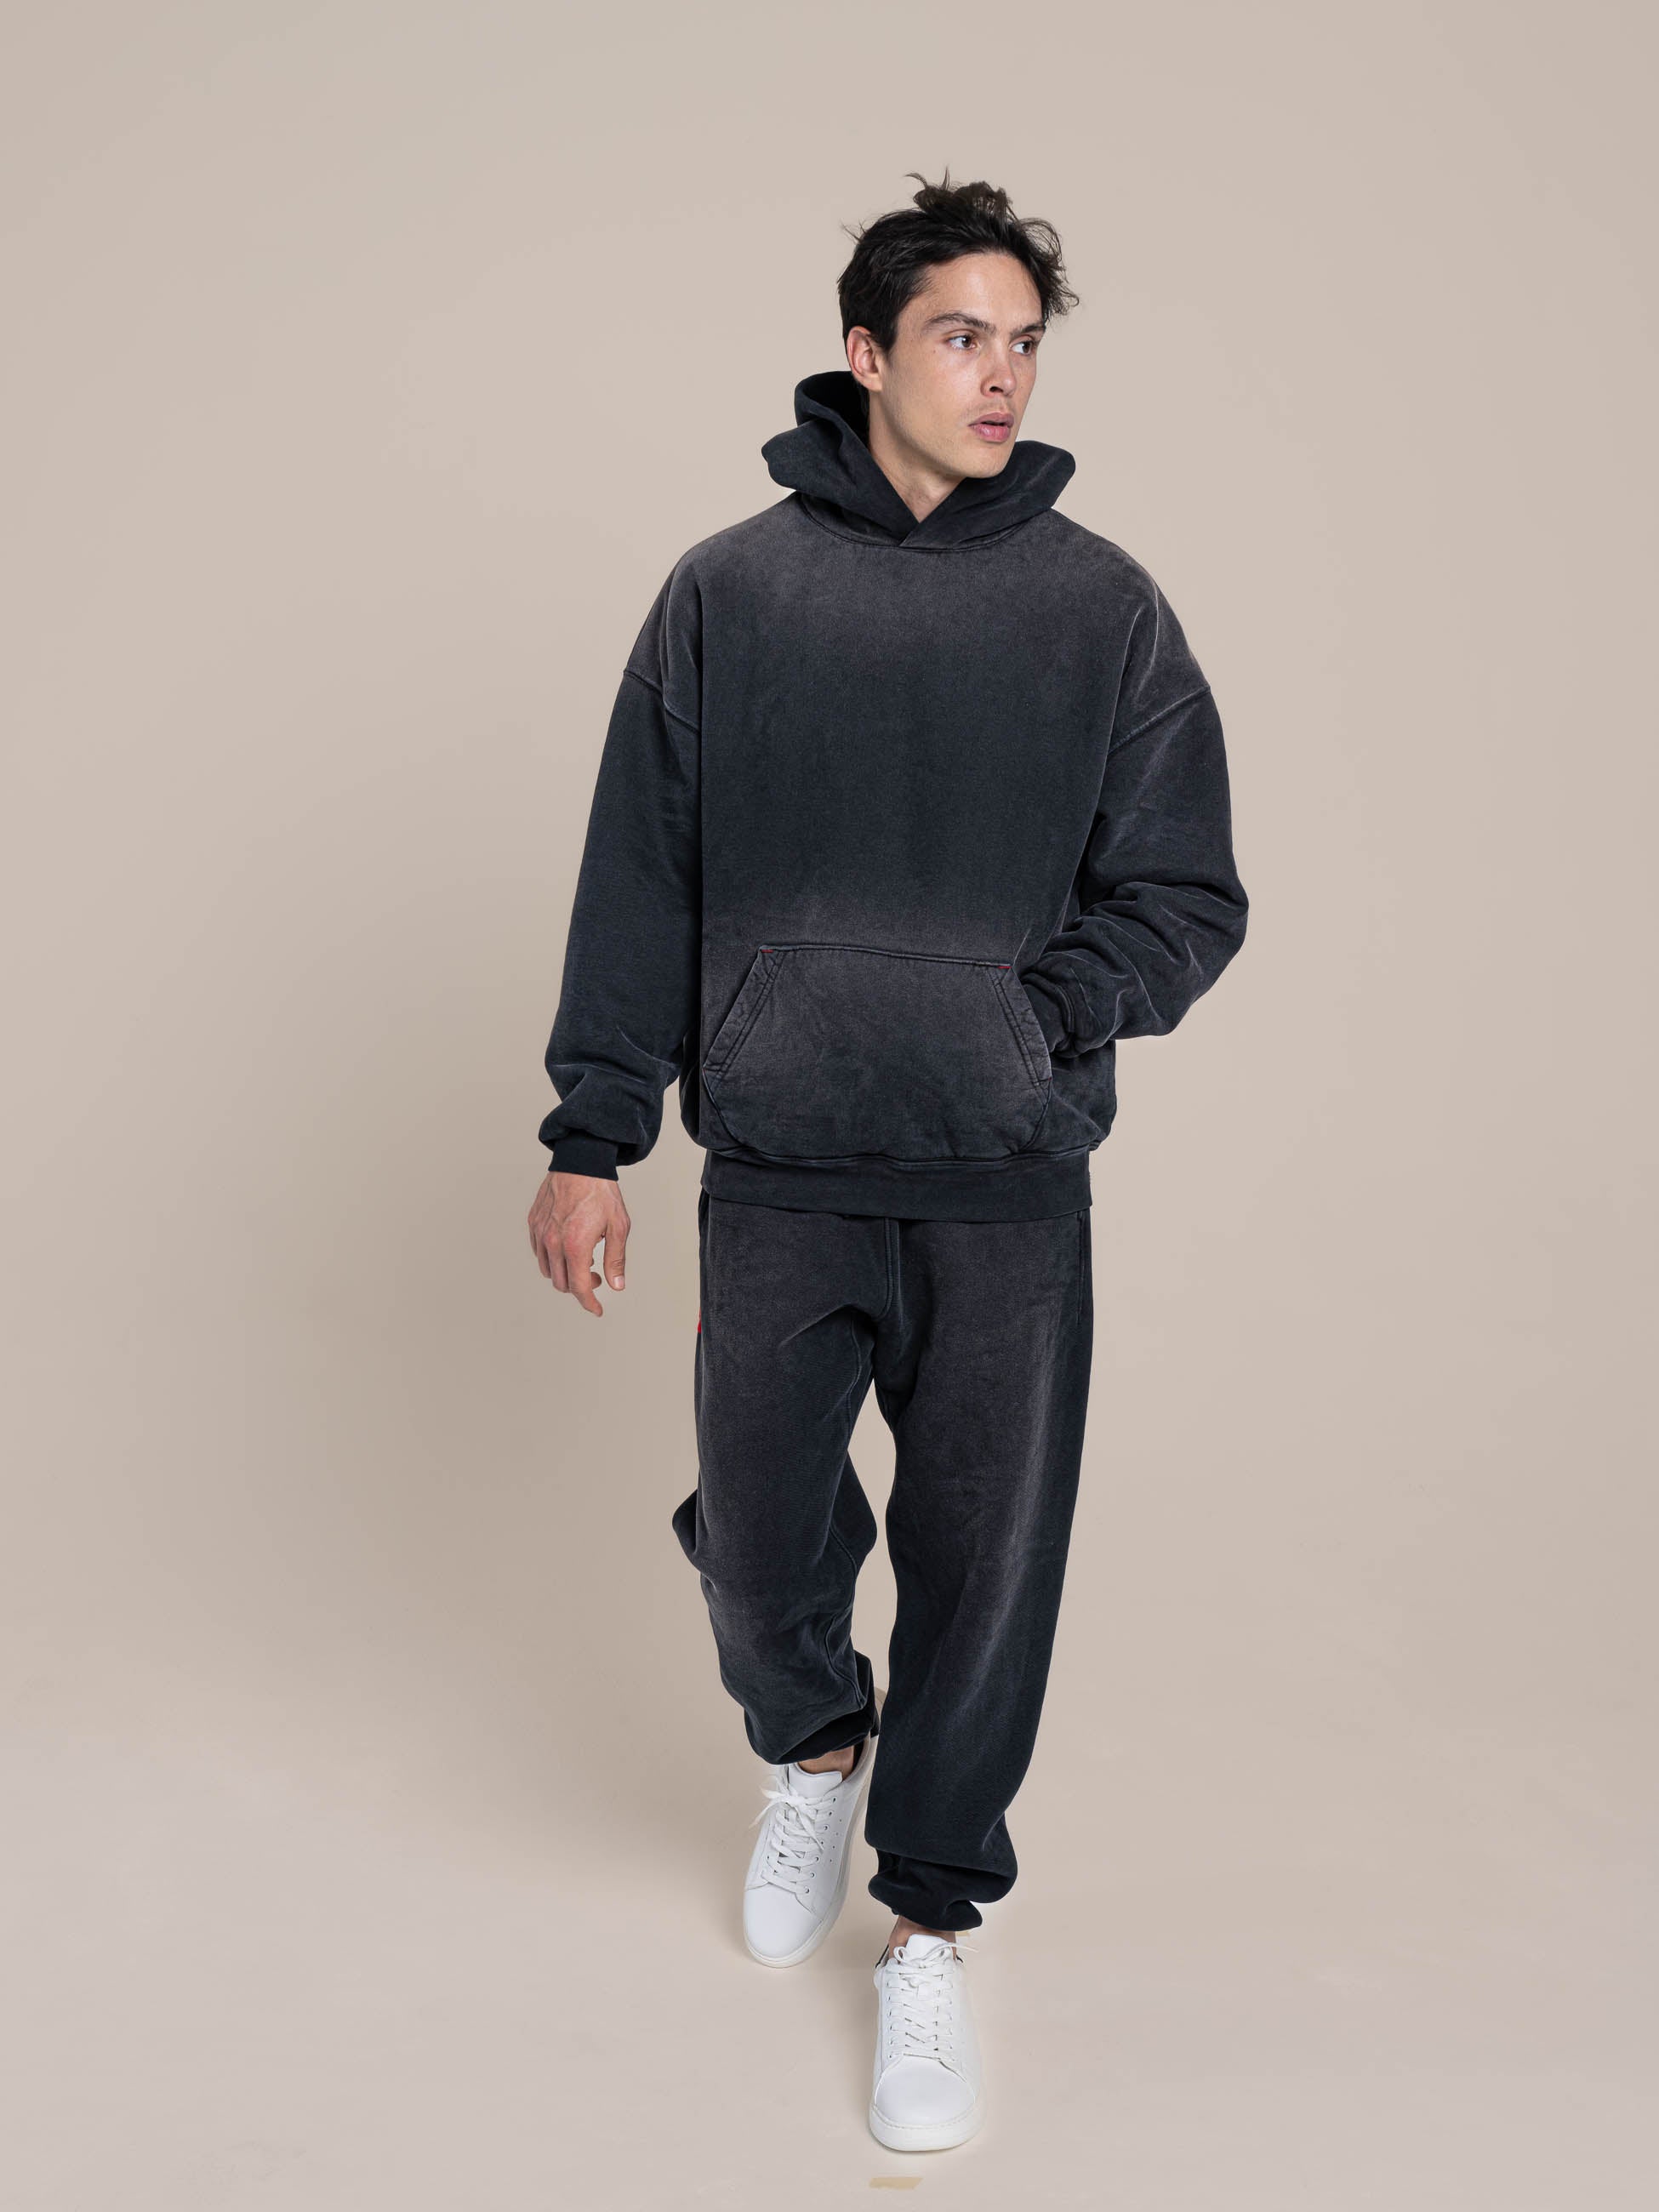 Male Model with Double Layered Black Hoodie and Fleece Black Sweatpants Double Layered Fleece Black Hoodie Flat Luxury Made in USA